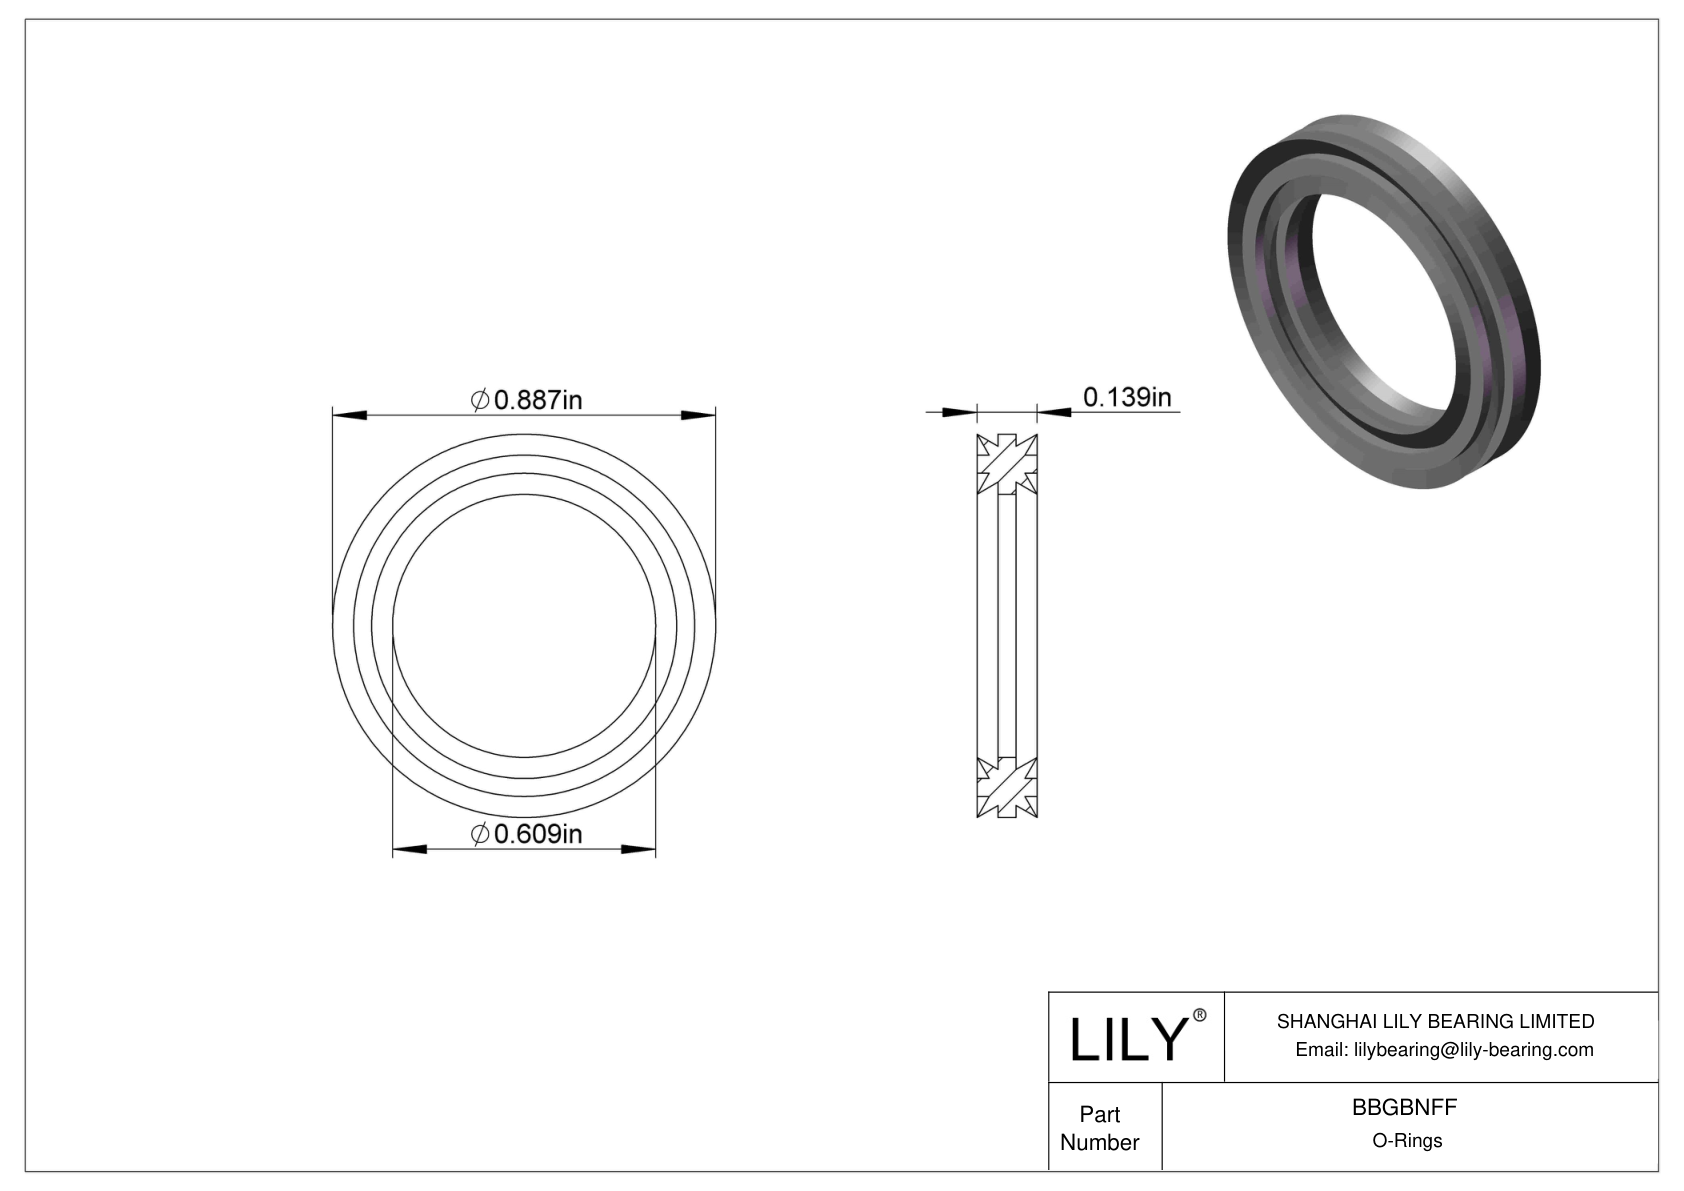 BBGBNFF Oil Resistant O-Rings Double X cad drawing